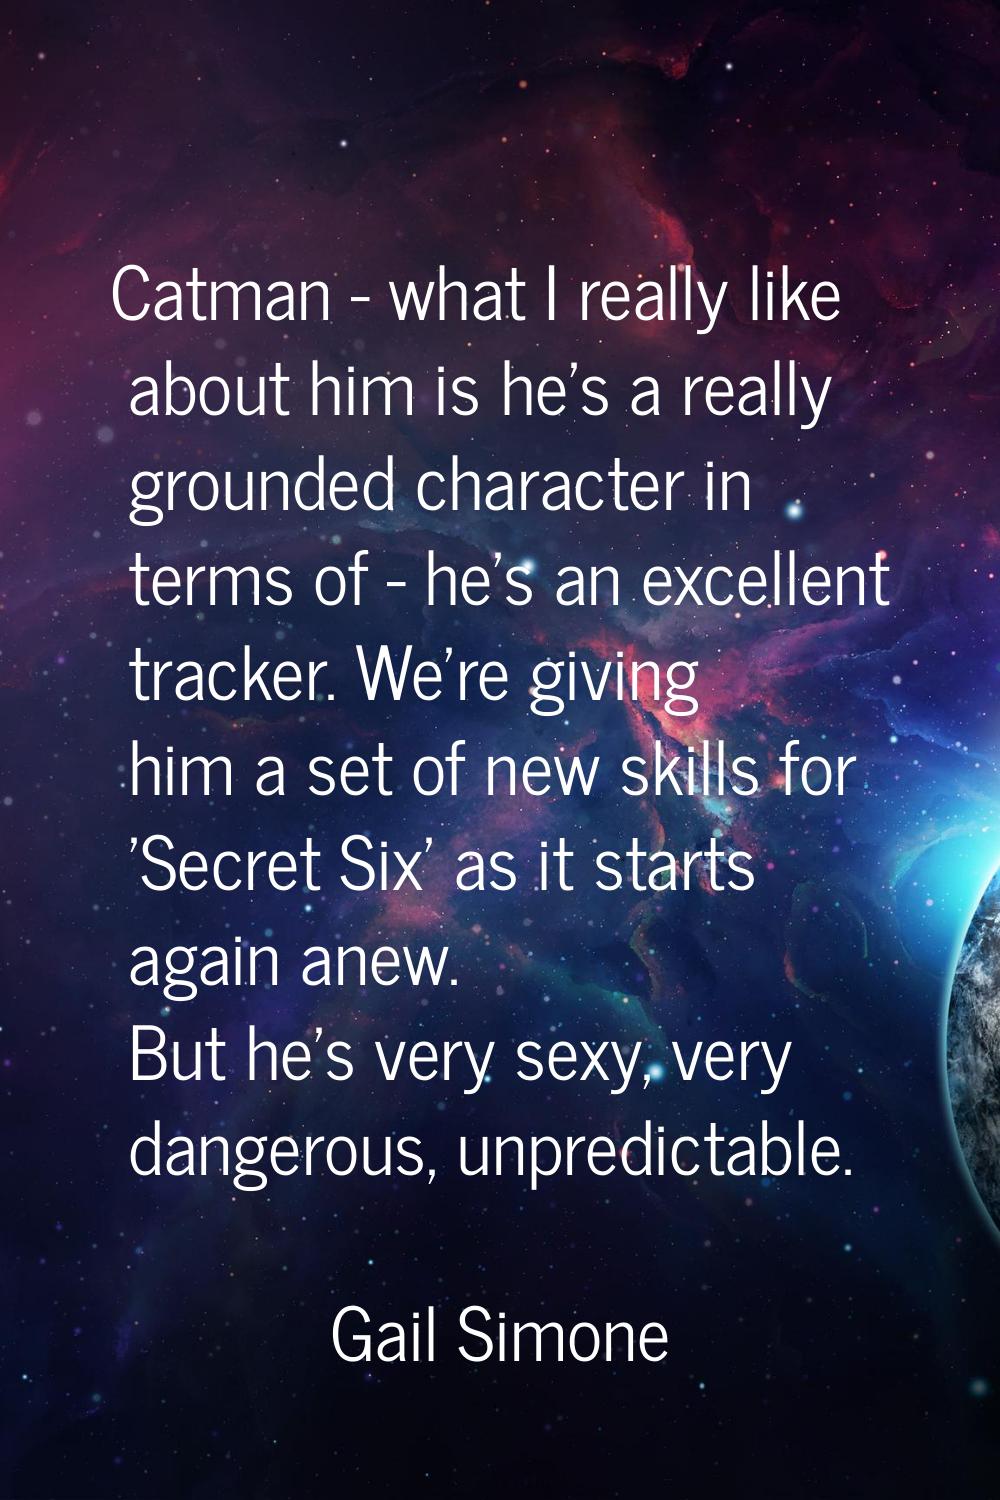 Catman - what I really like about him is he's a really grounded character in terms of - he's an exc